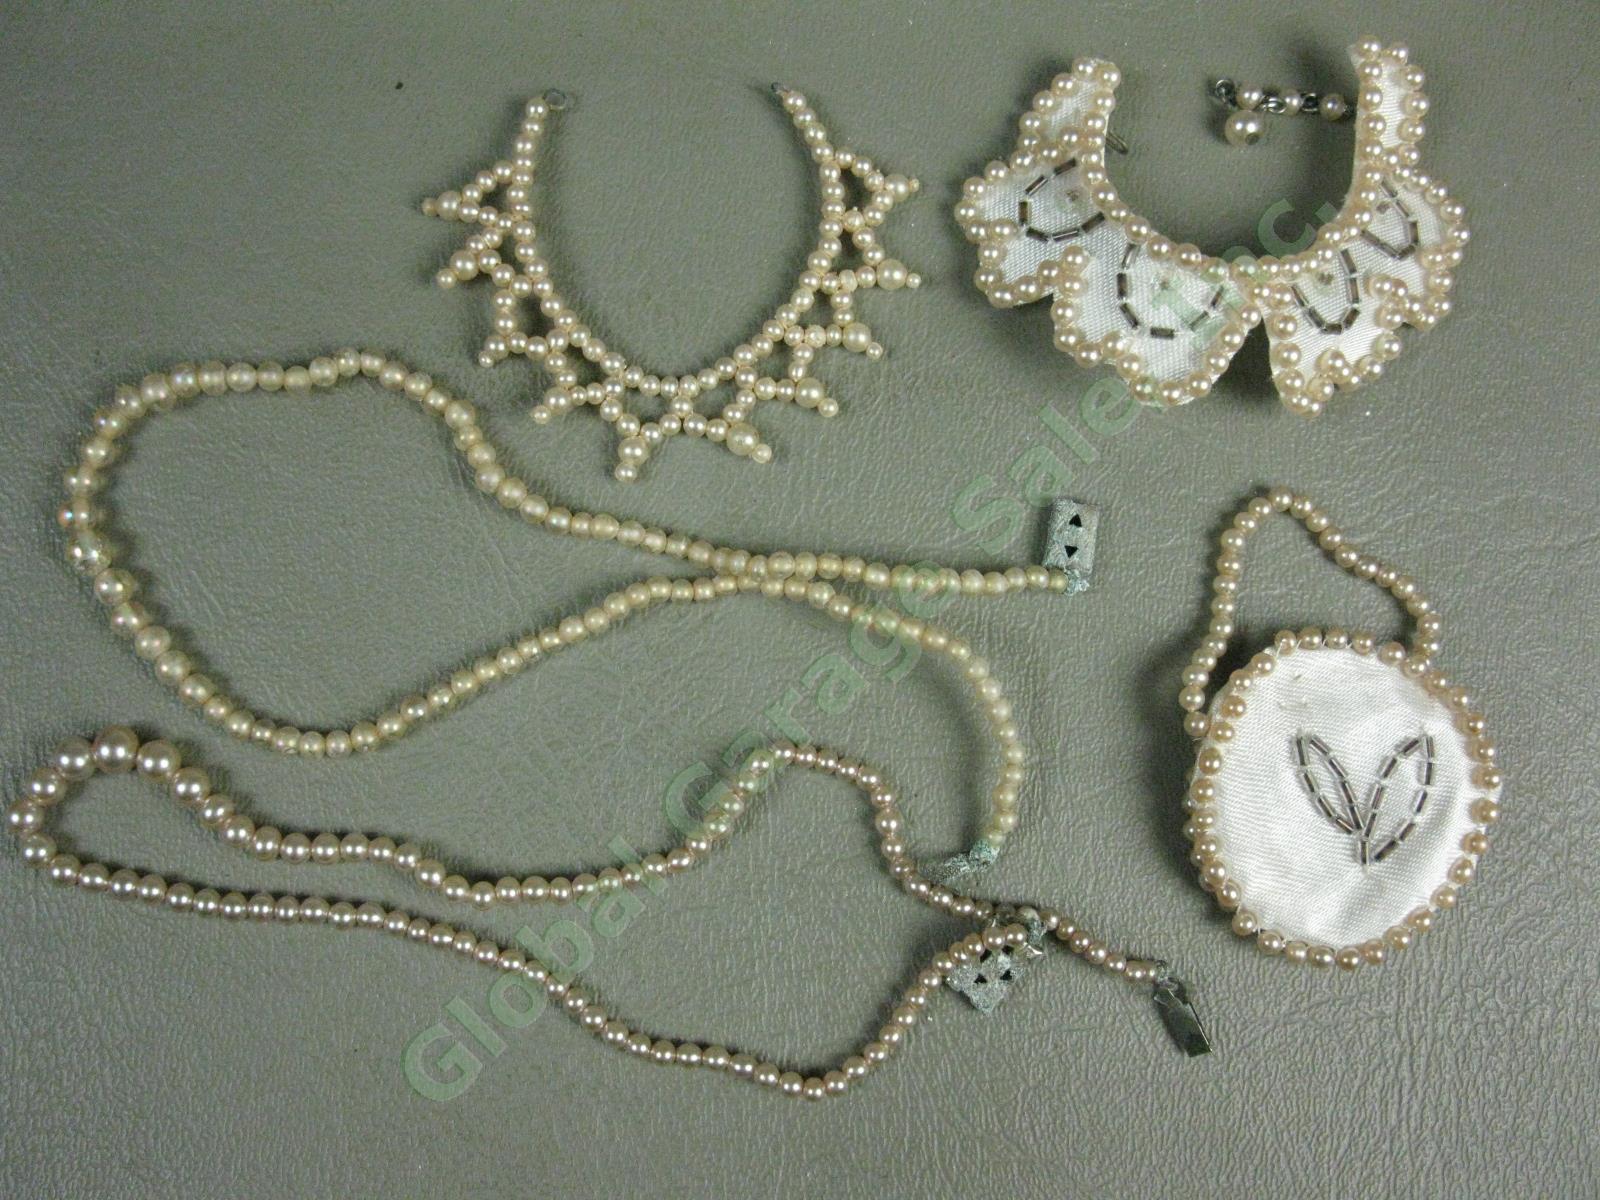 Huge Vintage 1950s Vogue Jill Doll Clothing Jewelry Accessories Collection Lot 8